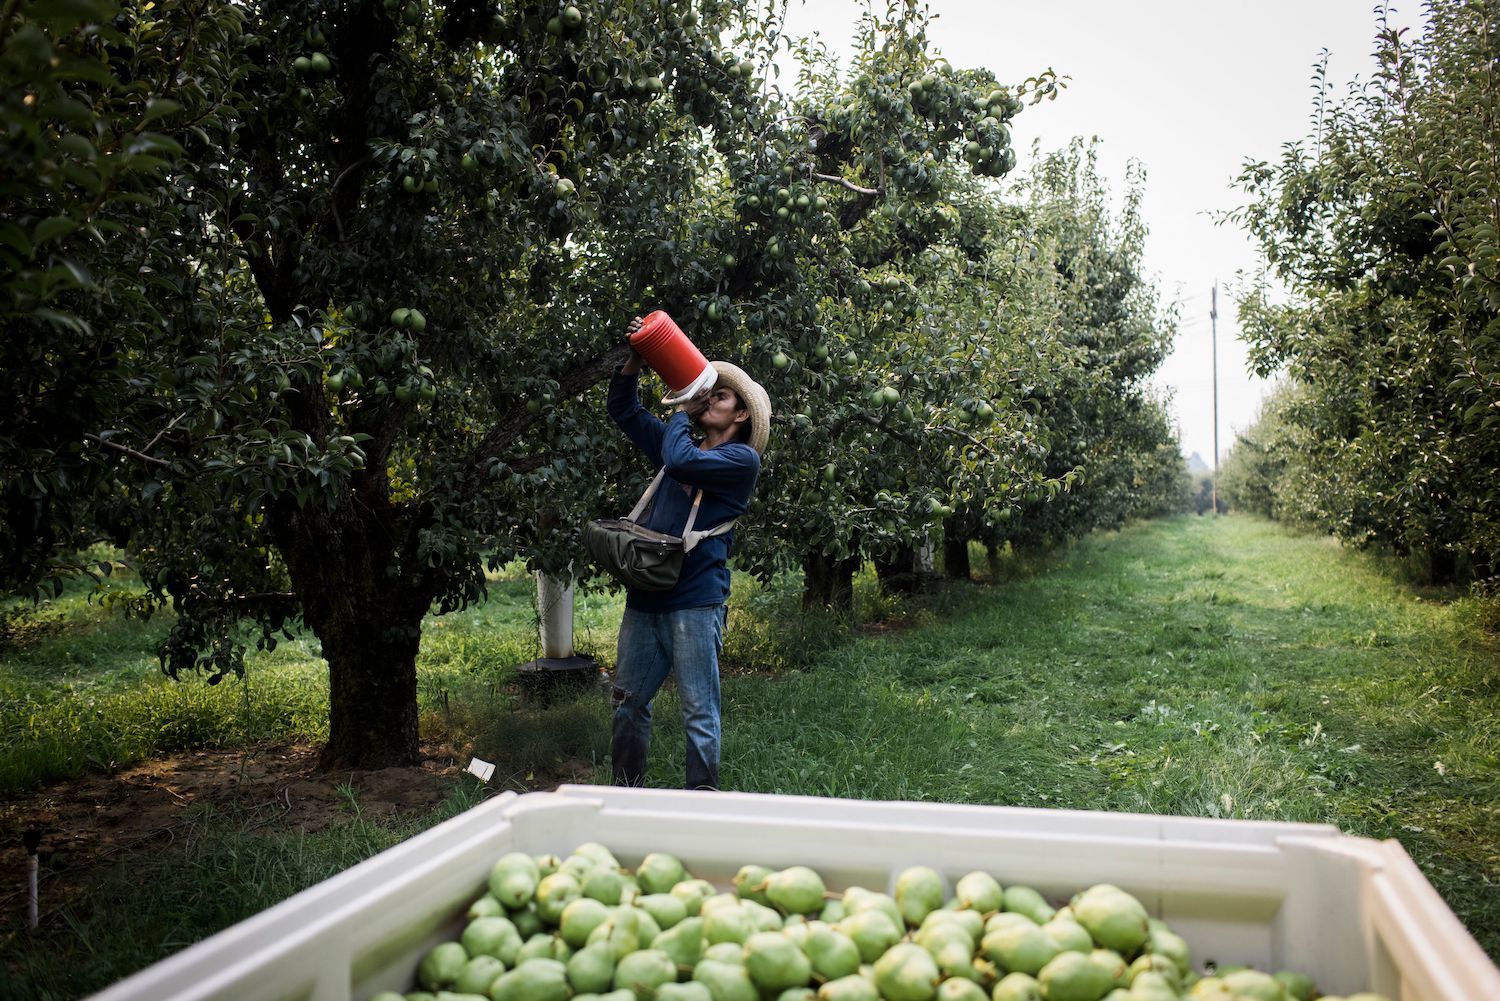 Fernando Llerenas drinks water while picking pears in Hood River, Oregon on August 13, 2021. - Amid an abnormal heat wave in the Pacific Northwest, farm workers are having their days, and profits, cut short by the extreme temperatures. September 2021